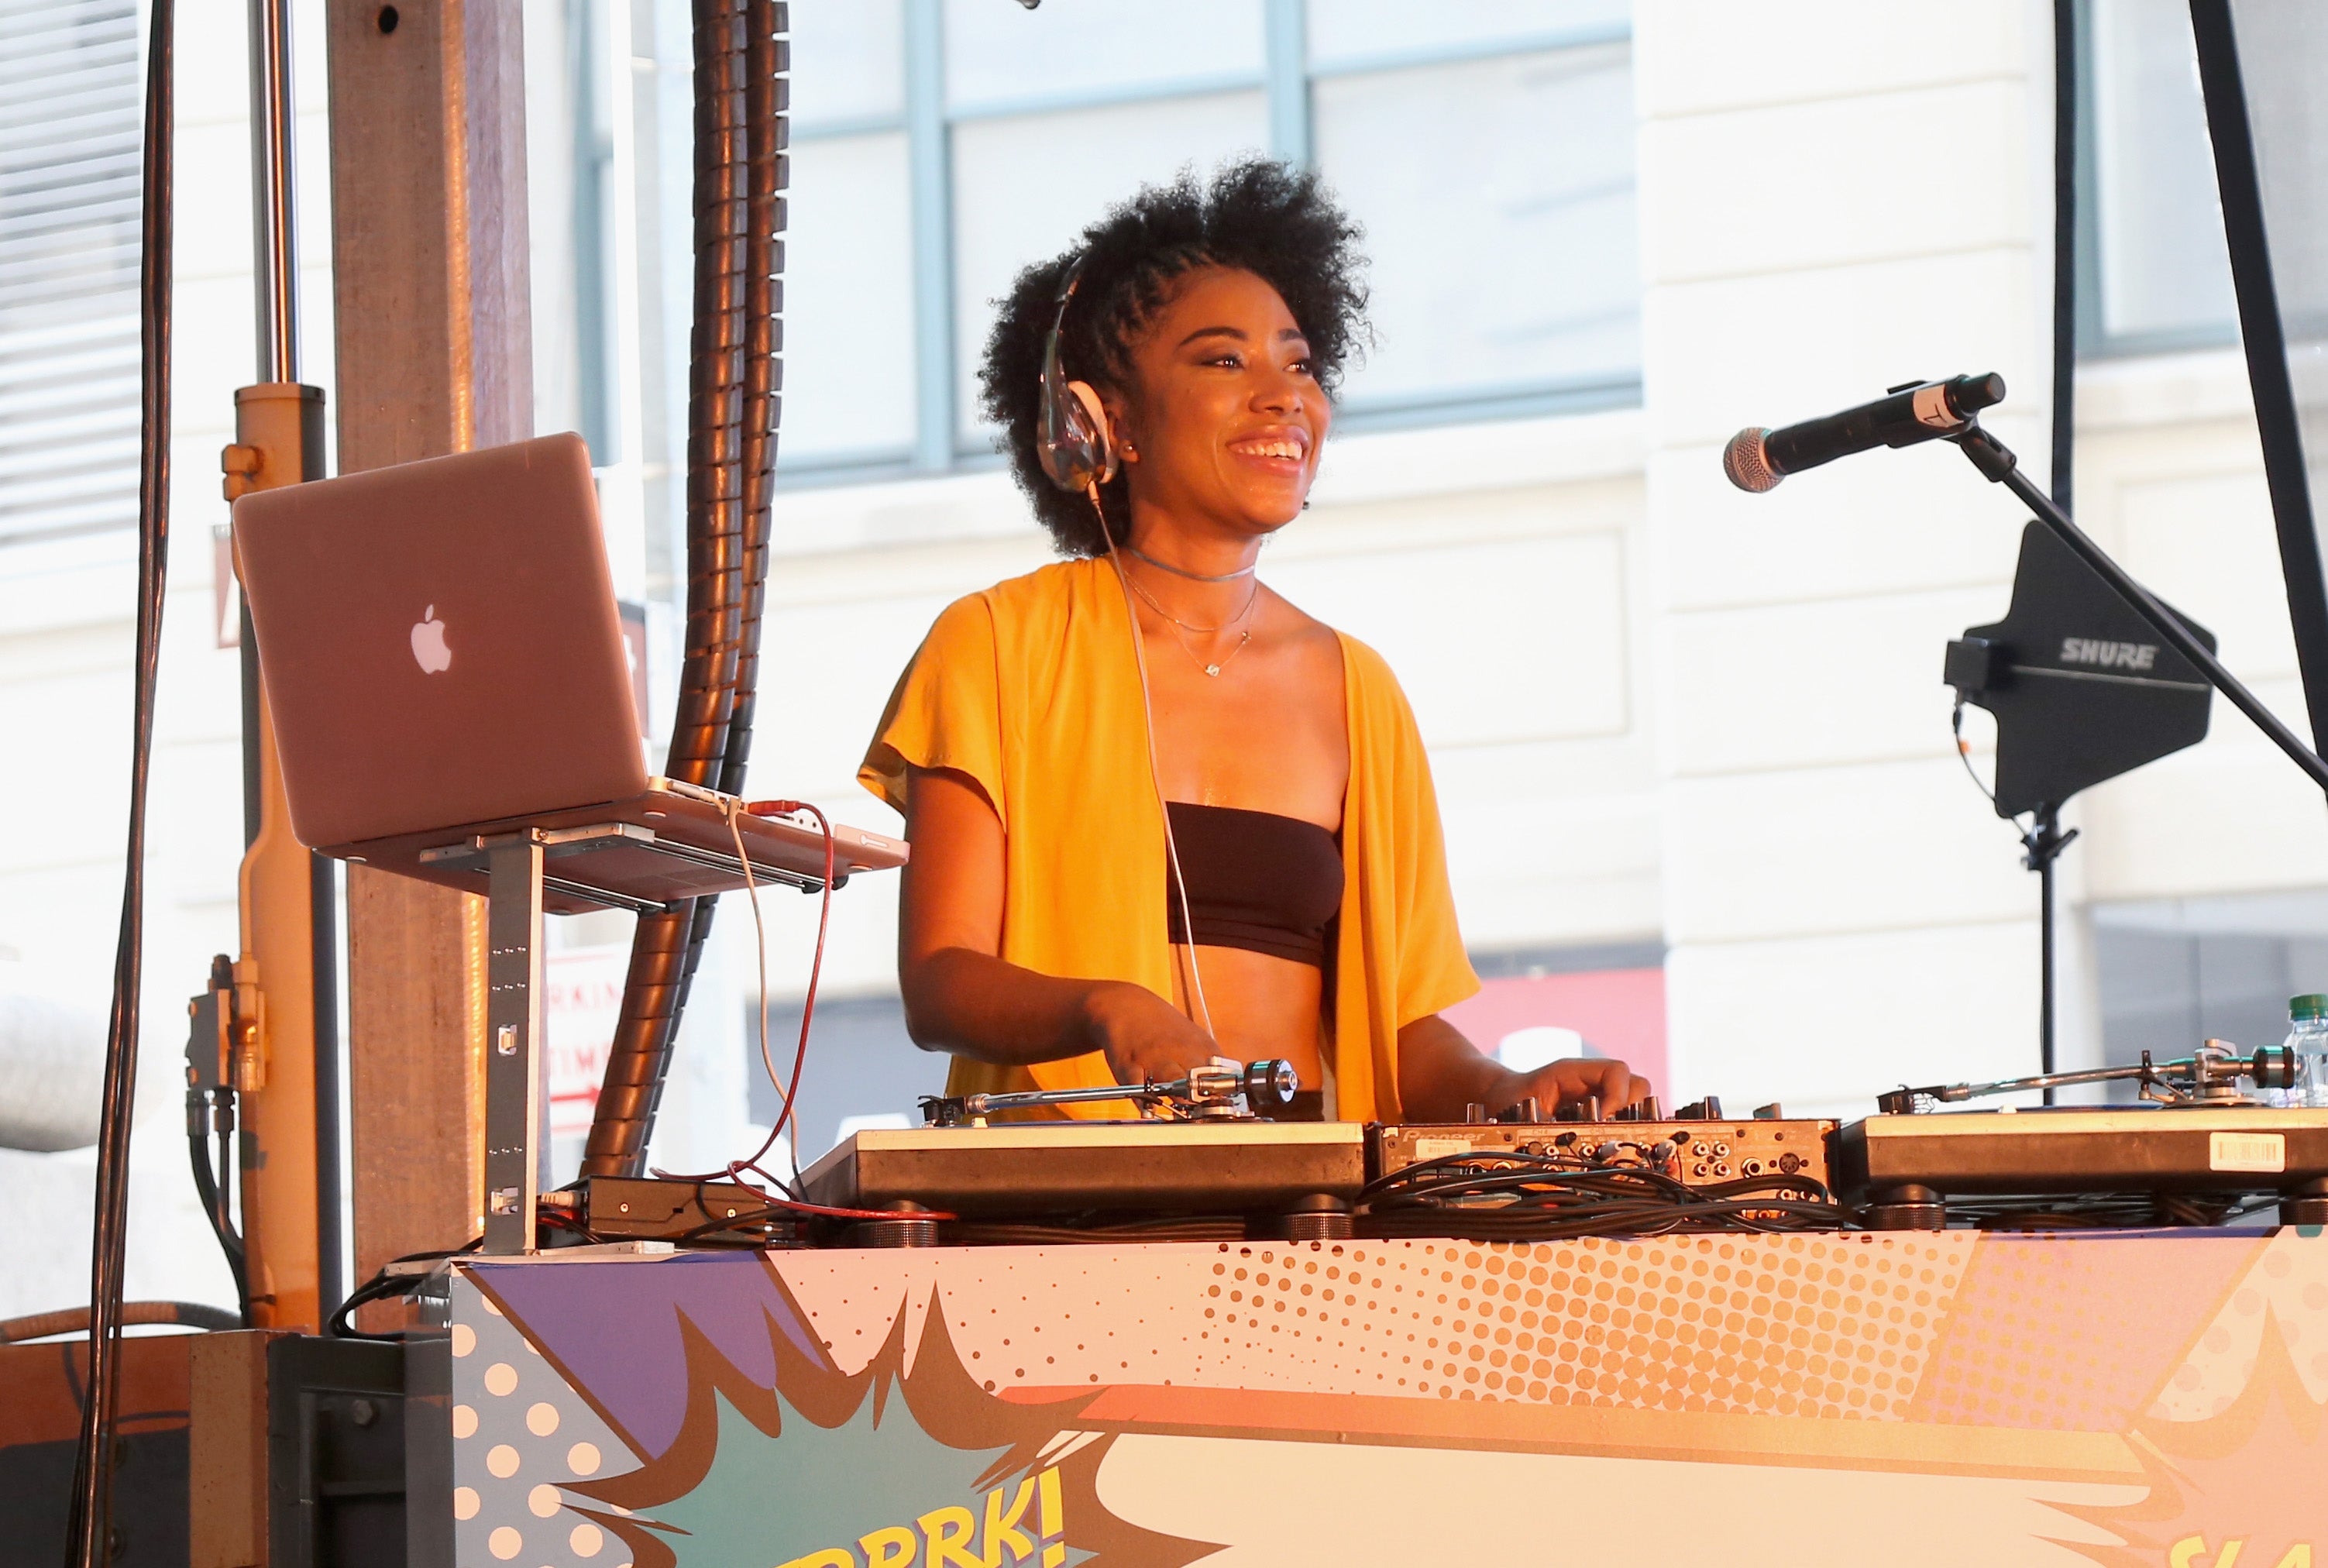 In Case You Missed It: On The Scene At the ESSENCE Street Style Block Party
